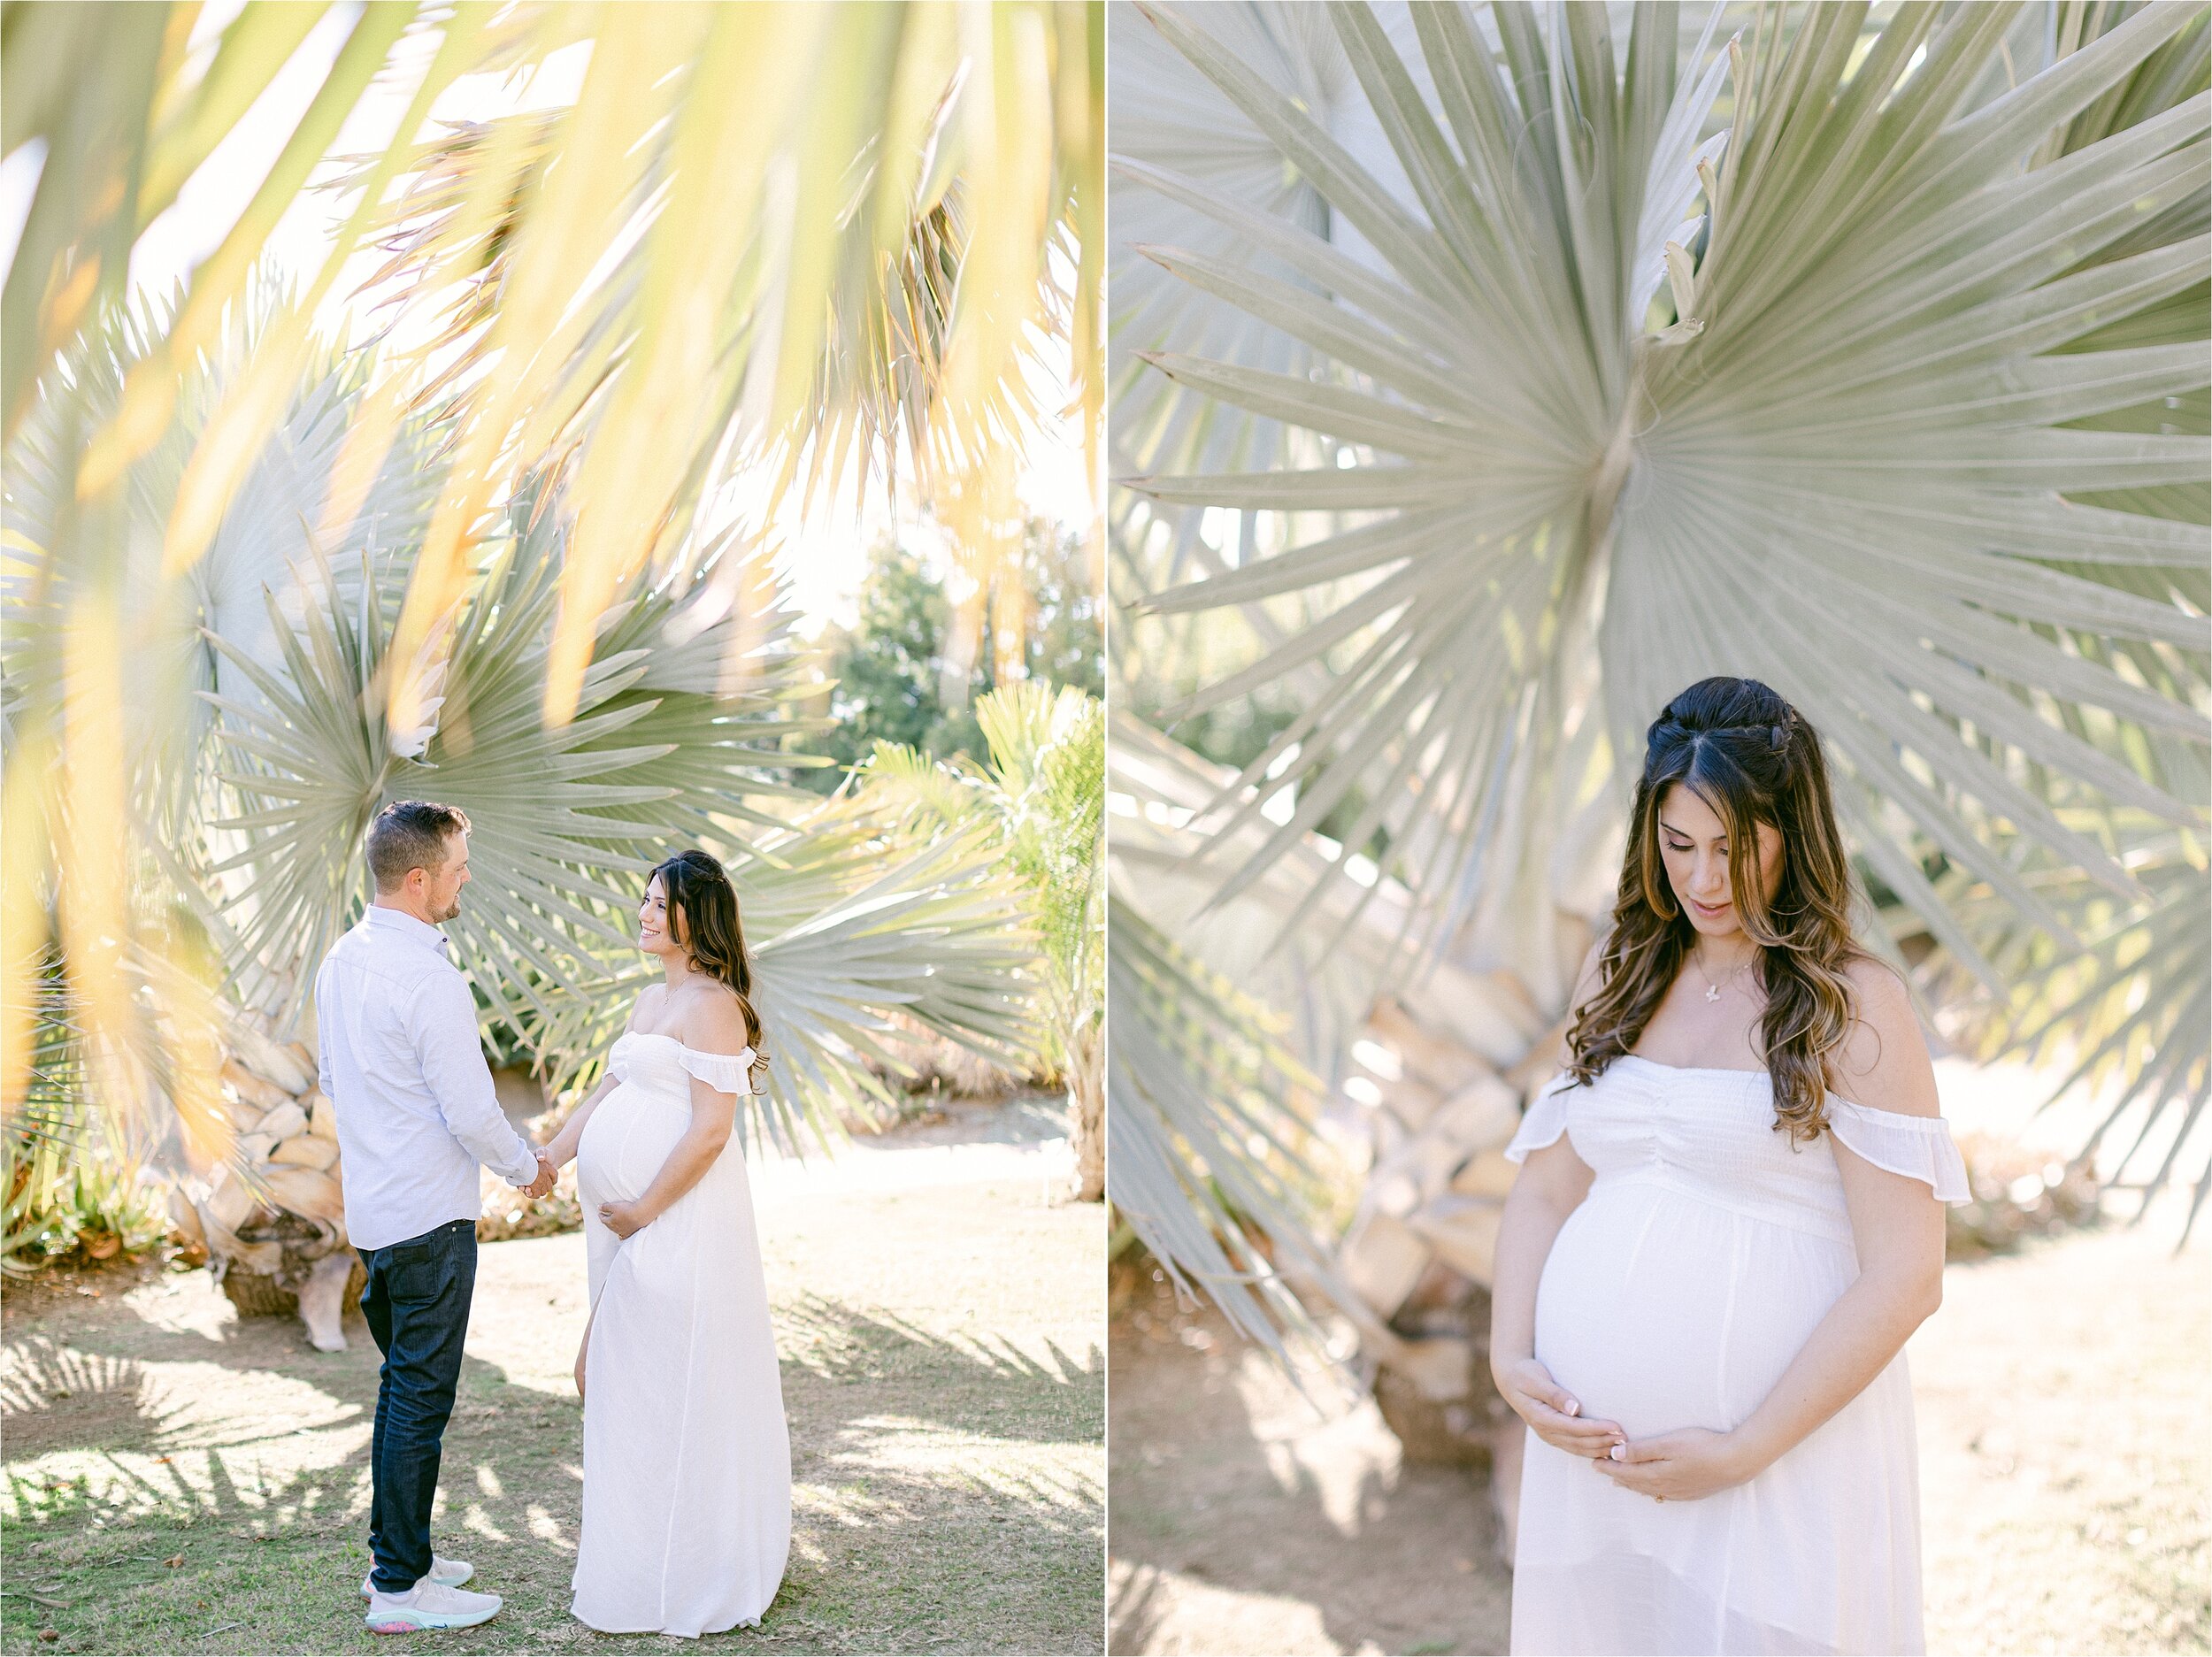 Expectant parents celebrate the anticipated arrival of their baby girl during their maternity photo session in the palm tree grove at the LA Arboretum.